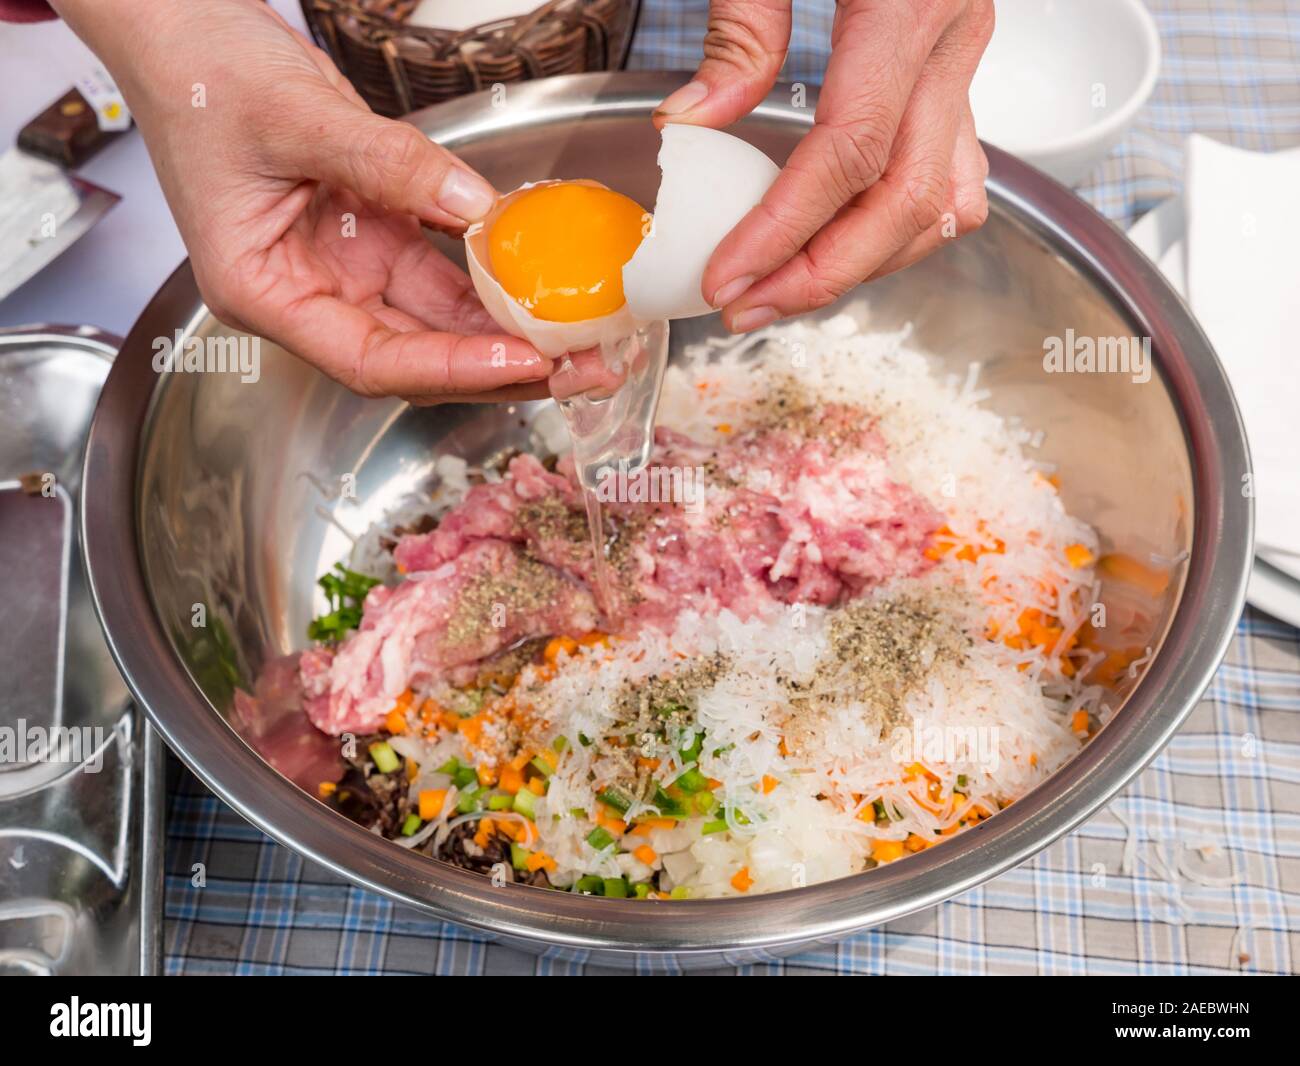 Mixing bowl with ingredients for pork mince spring rolls, with hands breaking egg, Vietnam, Asia Stock Photo